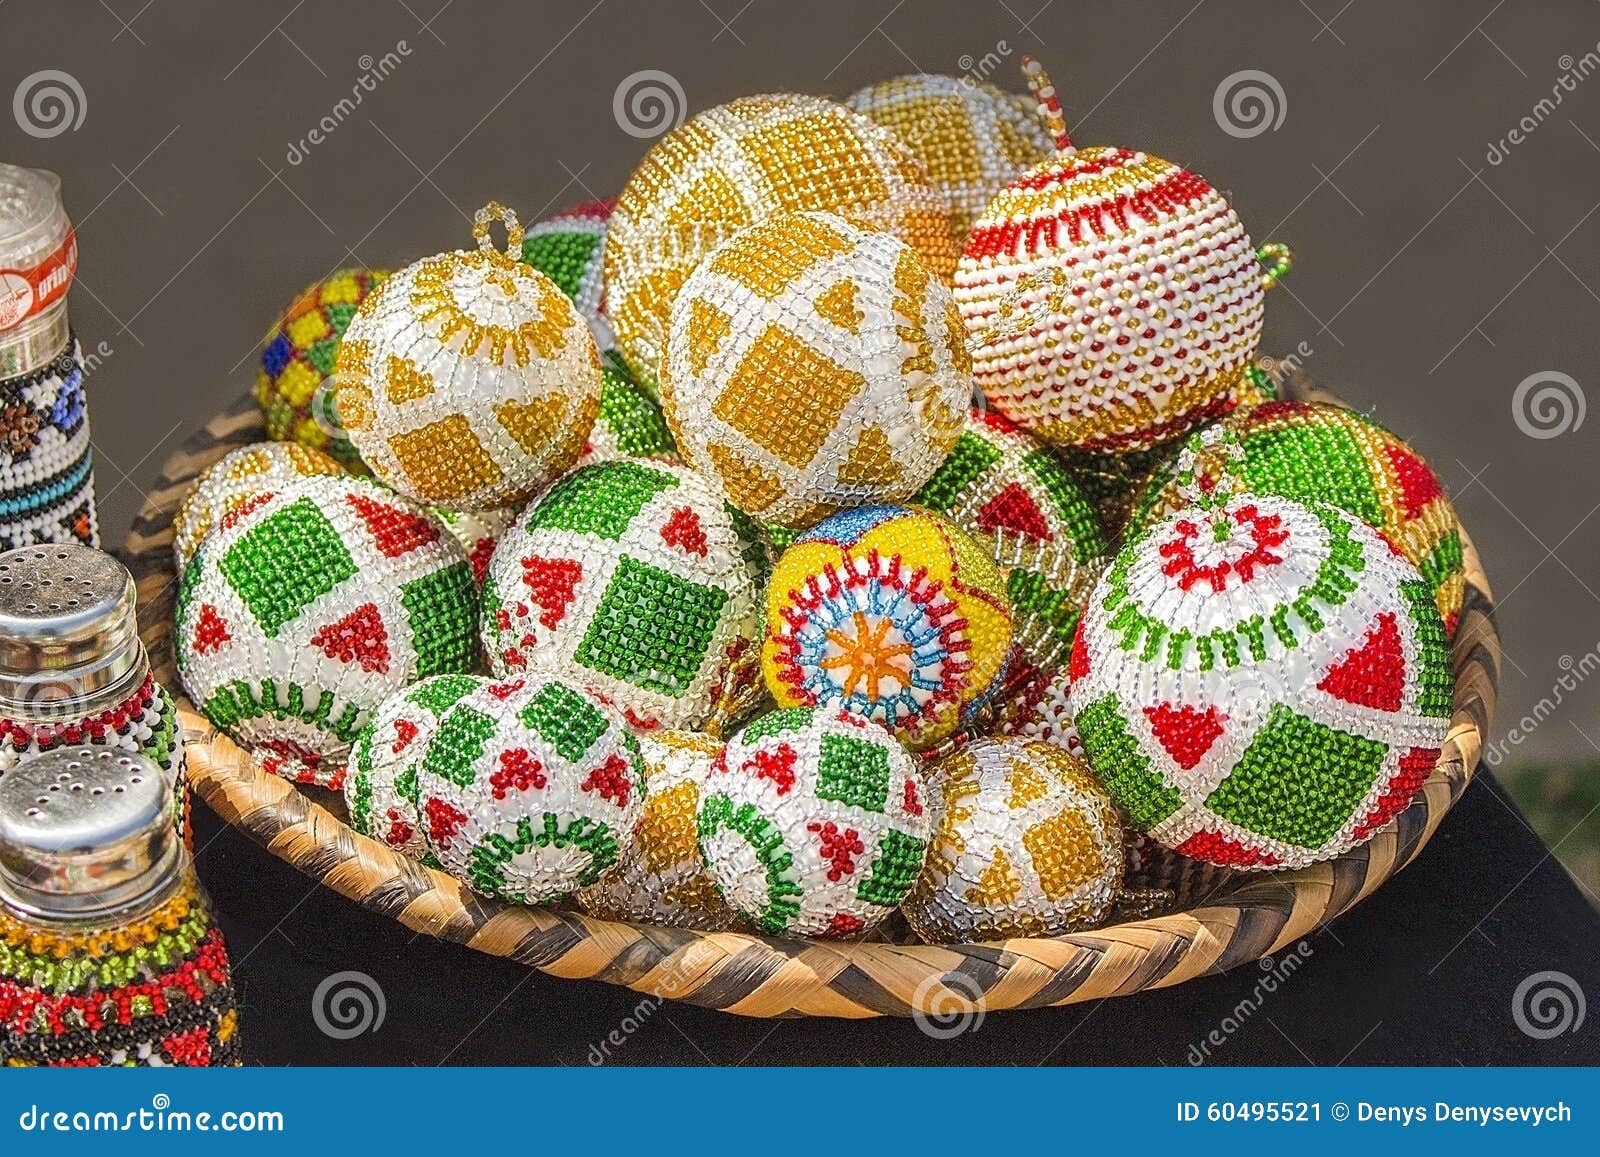 African Traditional Colorful Handmade Bead Toys Balls 